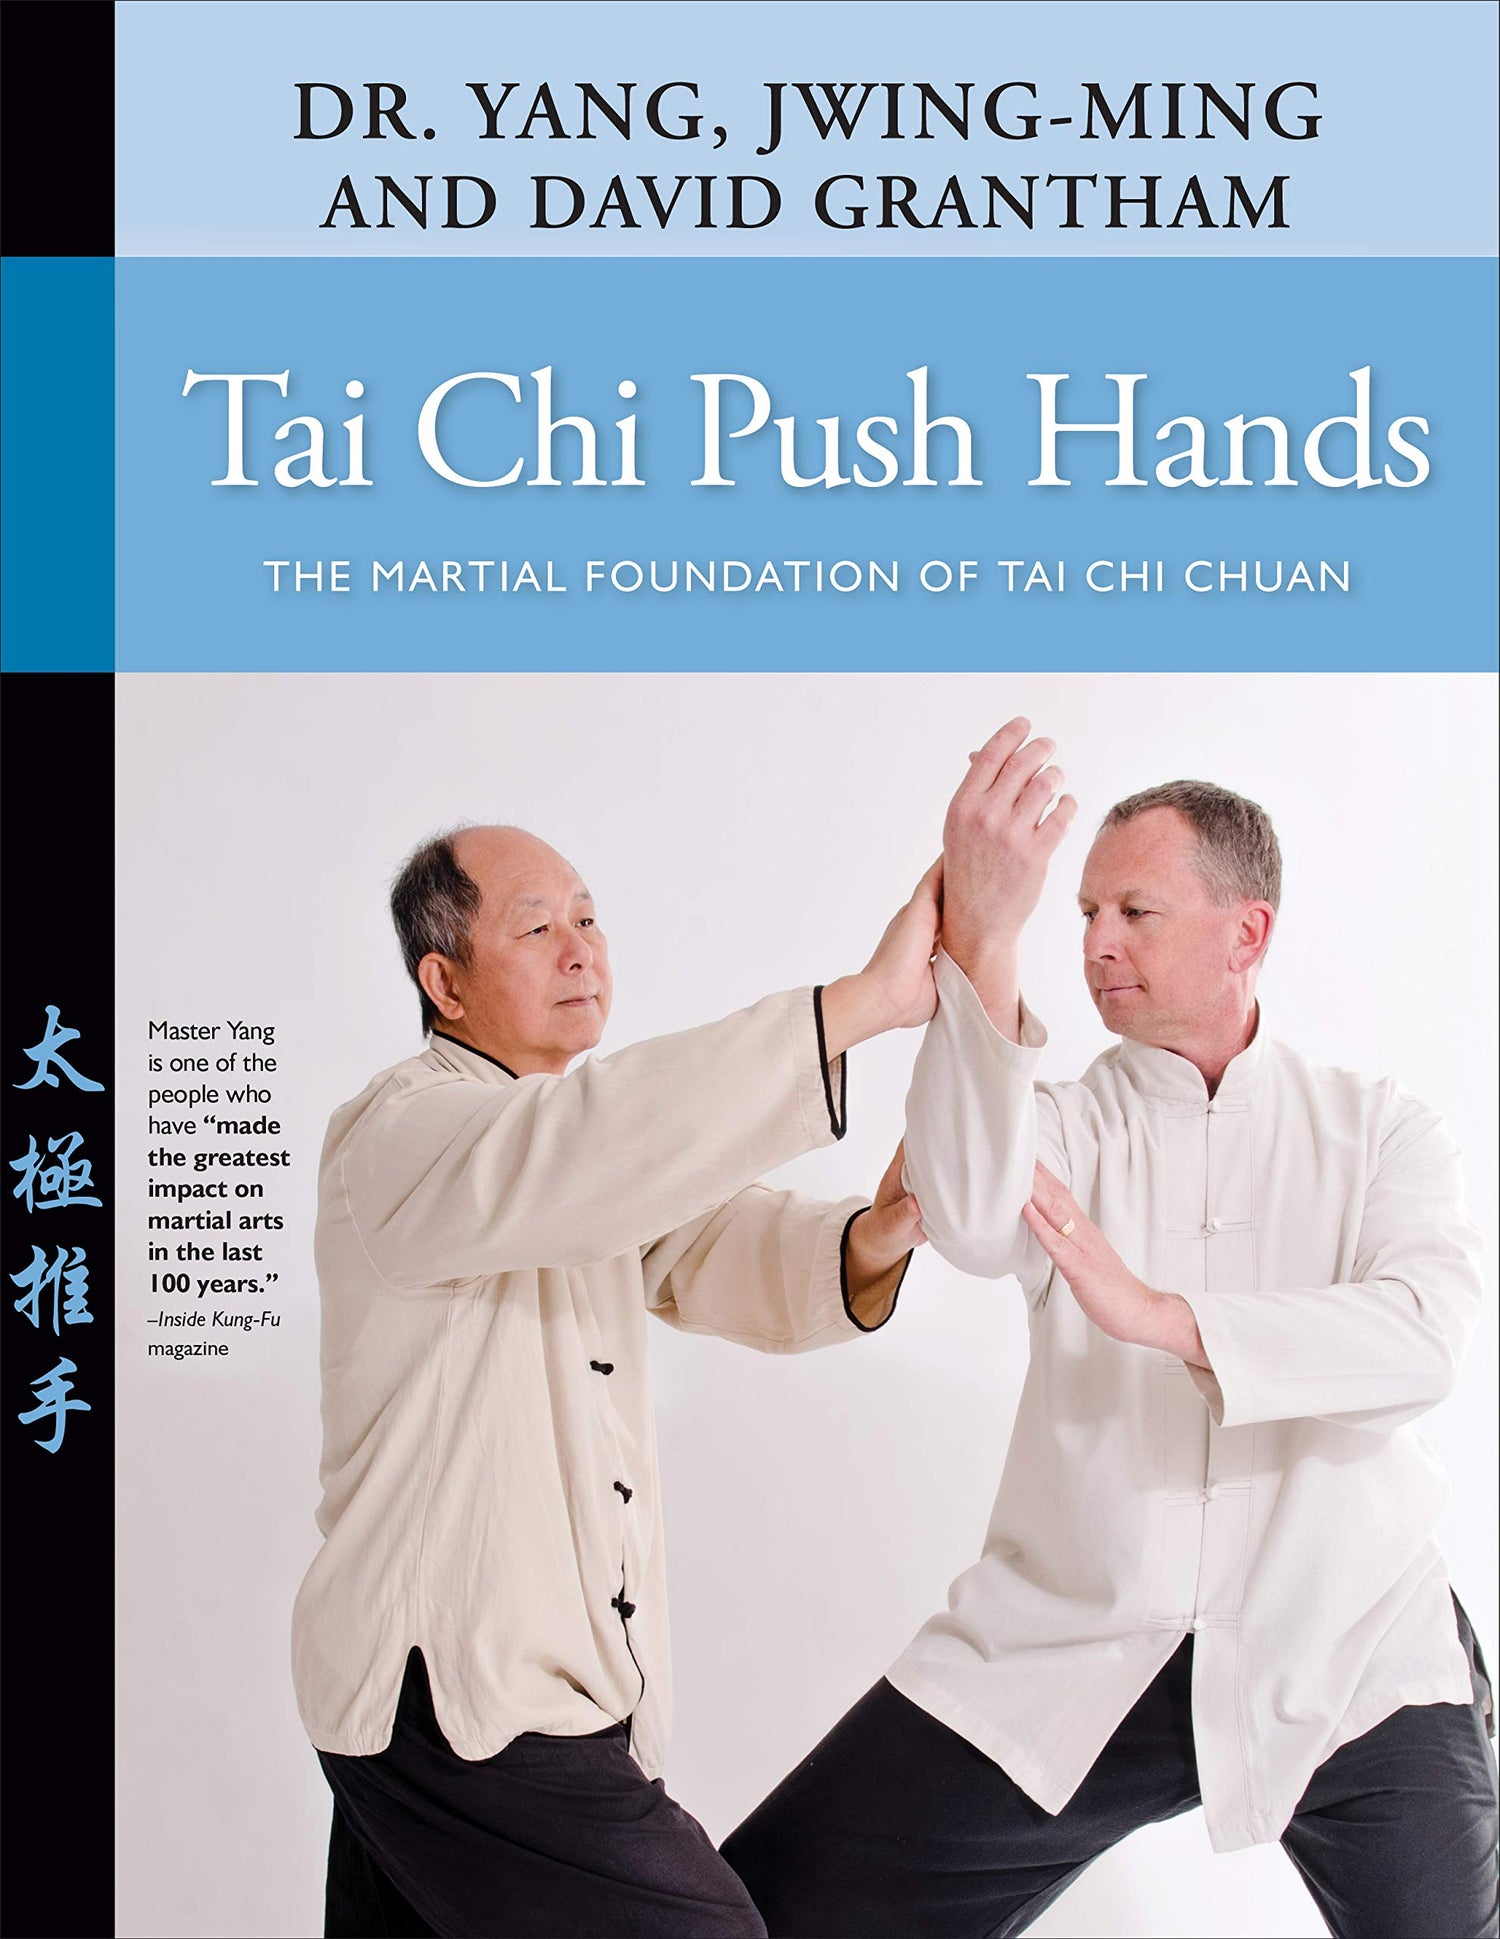 Tai Chi Push Hands: The Martial Foundation of Tai Chi Chuan Book by Dr Yang, Jwing-Ming - Budovideos Inc